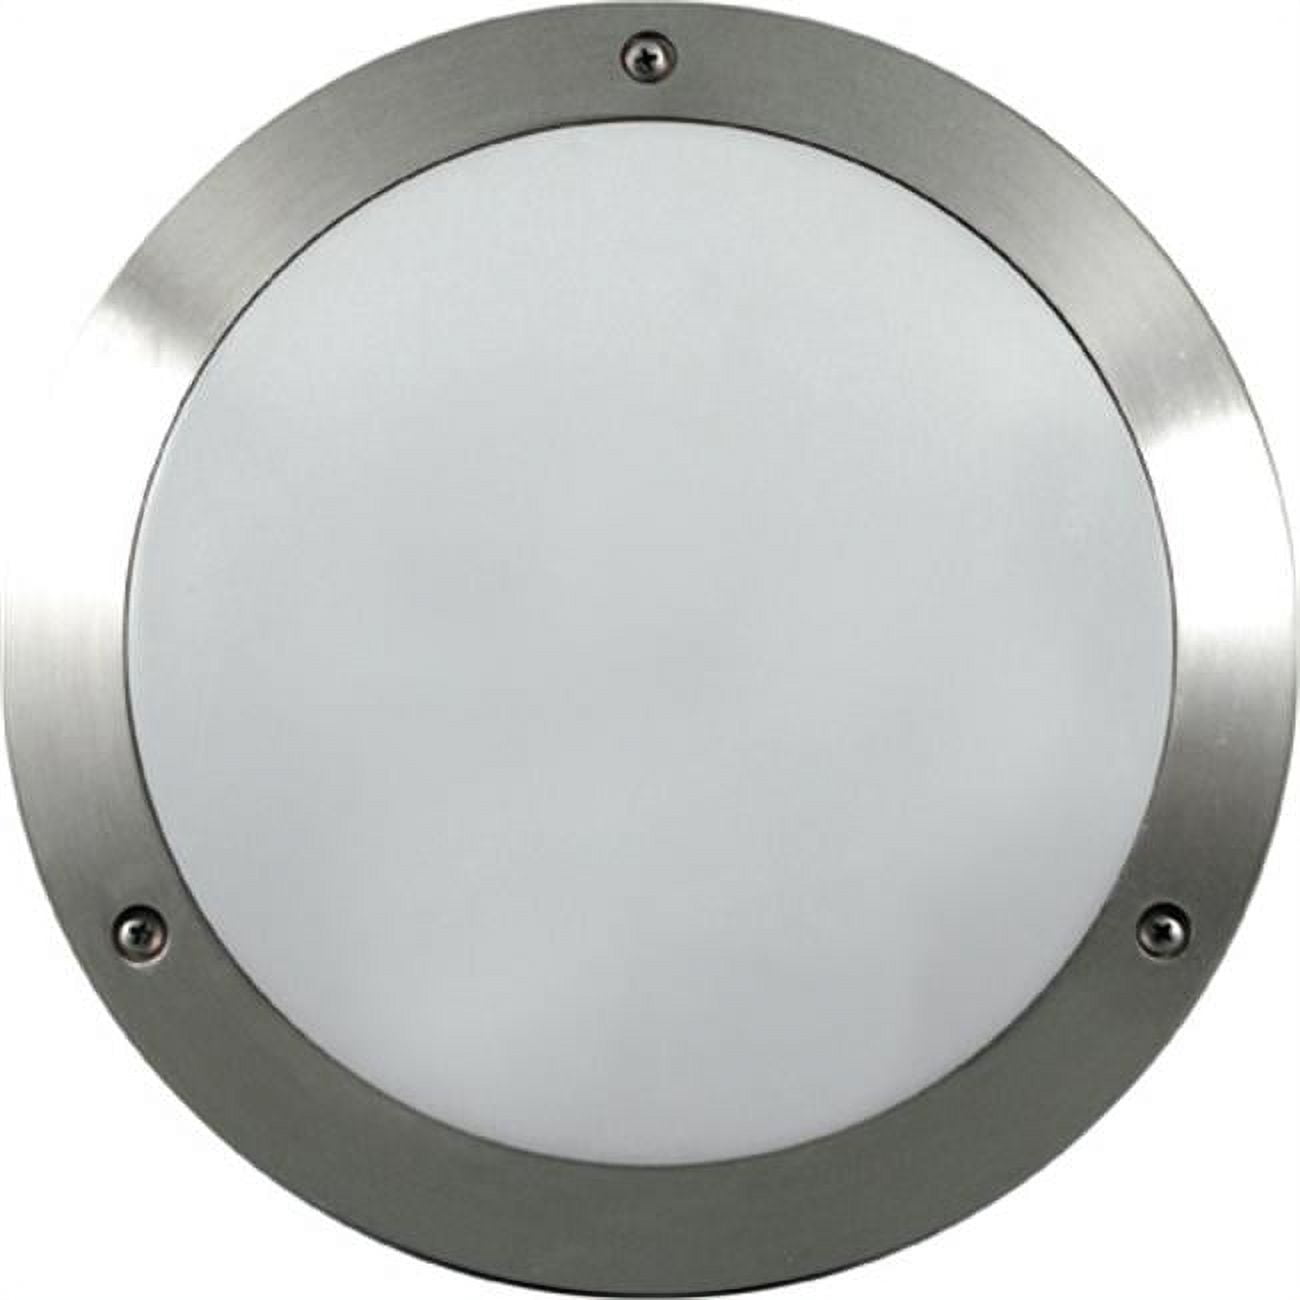 Picture of Dabmar Lighting W3985-SS 10.50 x 10.50 x 2.75 in. 120 V 13 watts Powder Coated Cast Aluminum Surface Mounted Wall Fixture Light with S13-GU-24 Flourescent Lamp, Stainless Steel